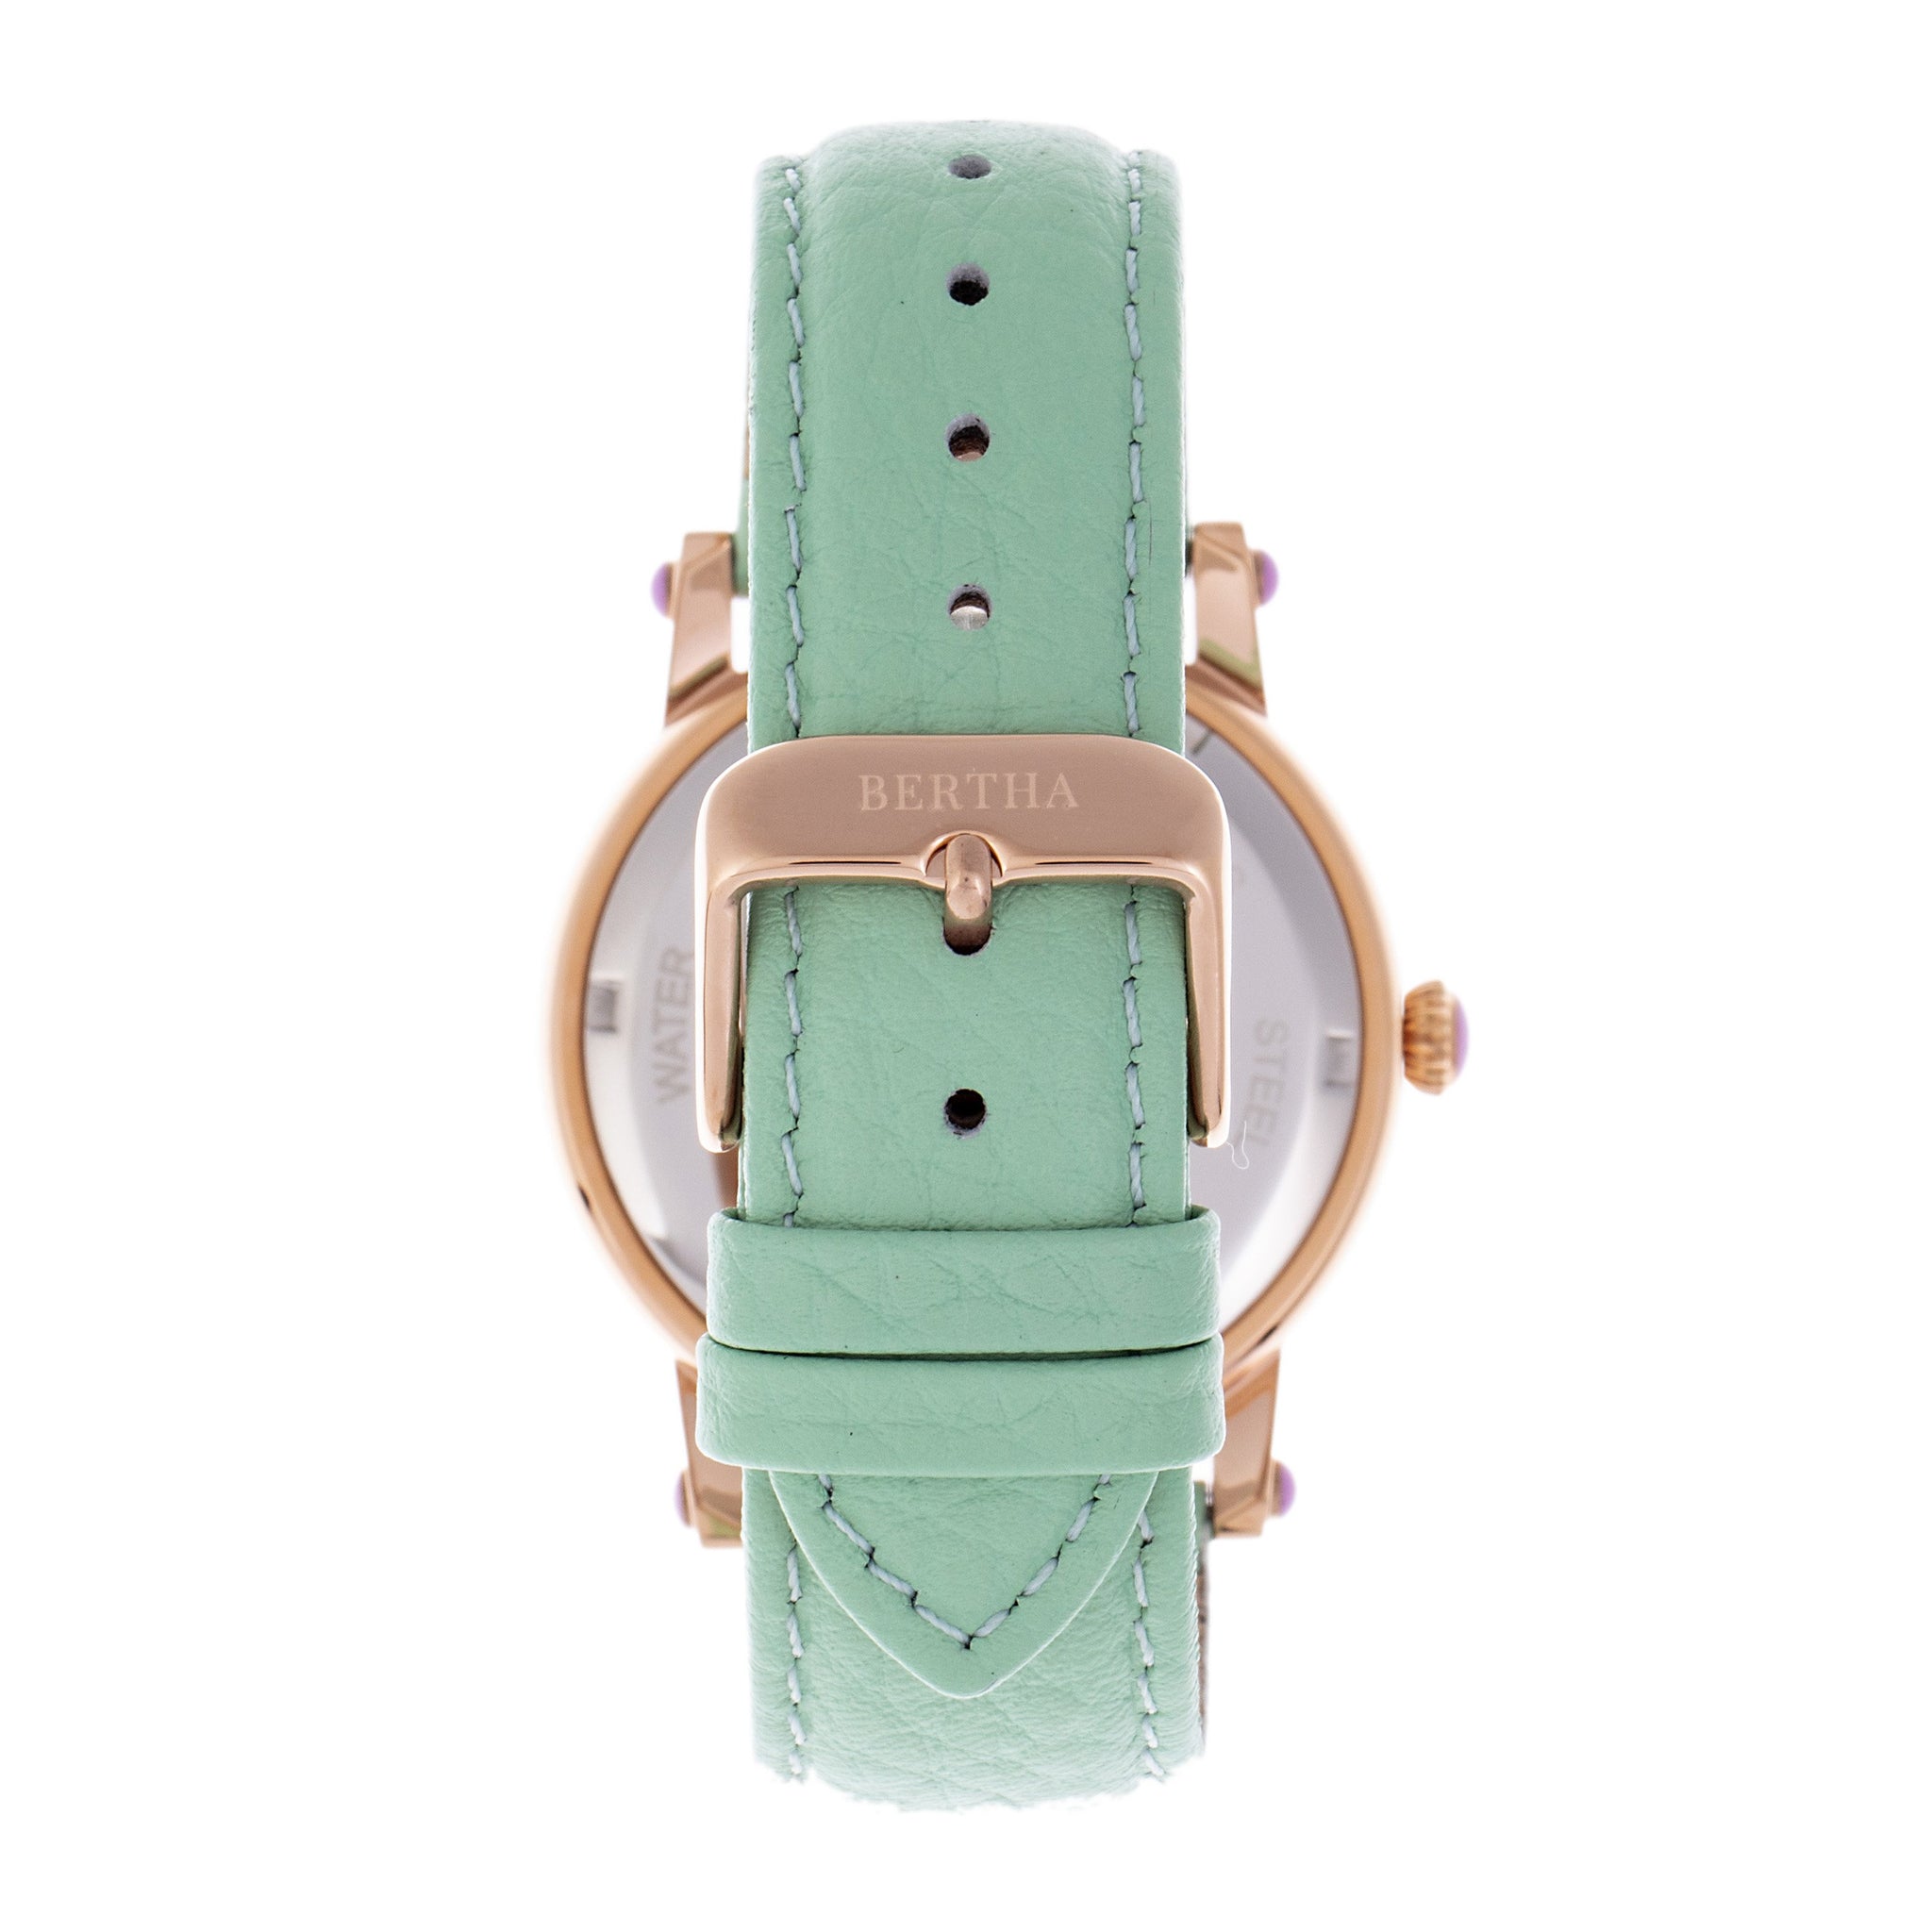 Bertha Betsy MOP Leather-Band Ladies Watch - Rose Gold/Mint - BTHBR5704